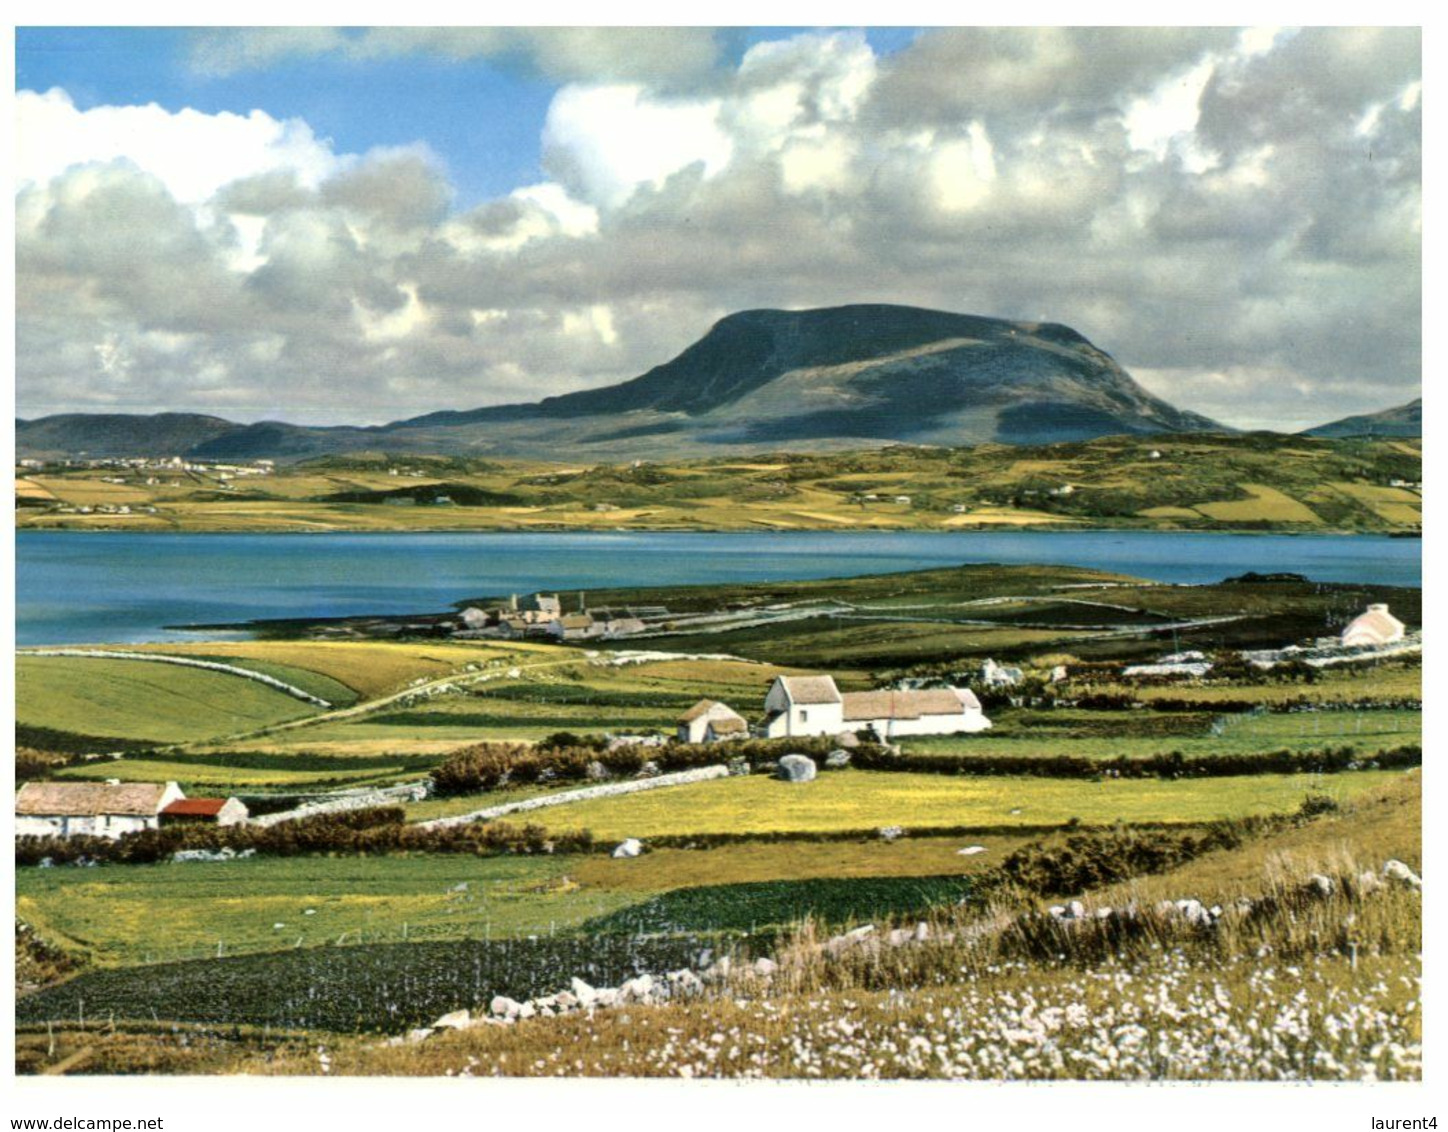 (N 19 A) Ireland - Donegal Muckish Mountain - Donegal